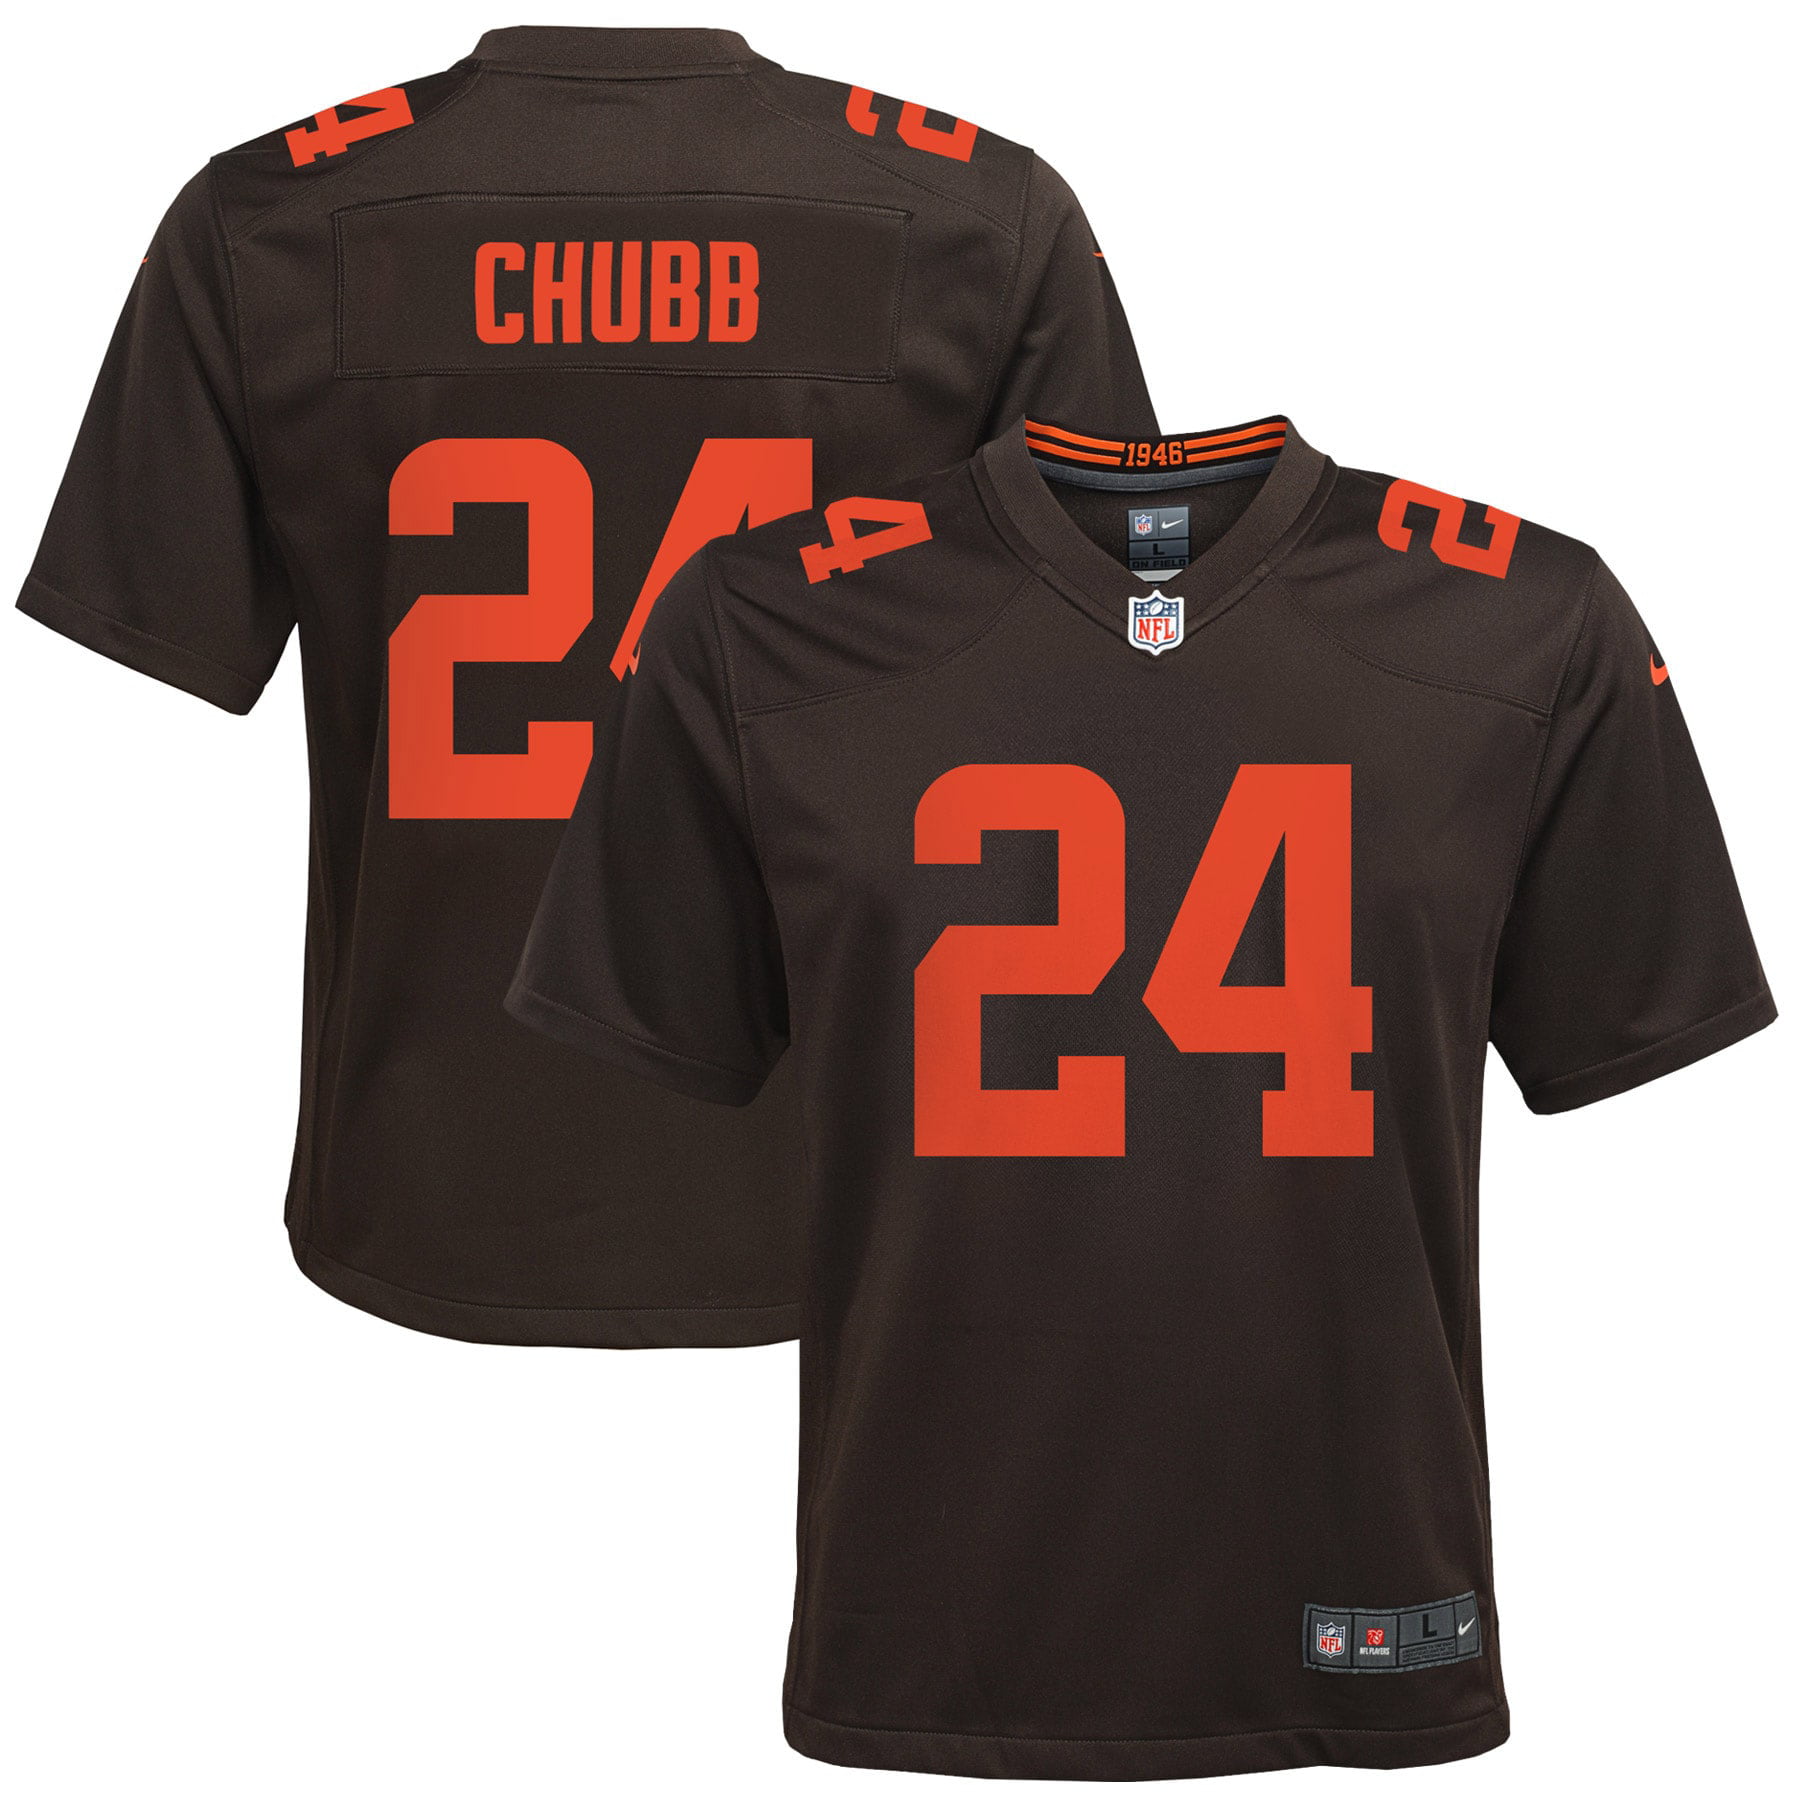 Nick Chubb Cleveland Browns Nike Youth Alternate Game Jersey - Brown - Walmart.com ...